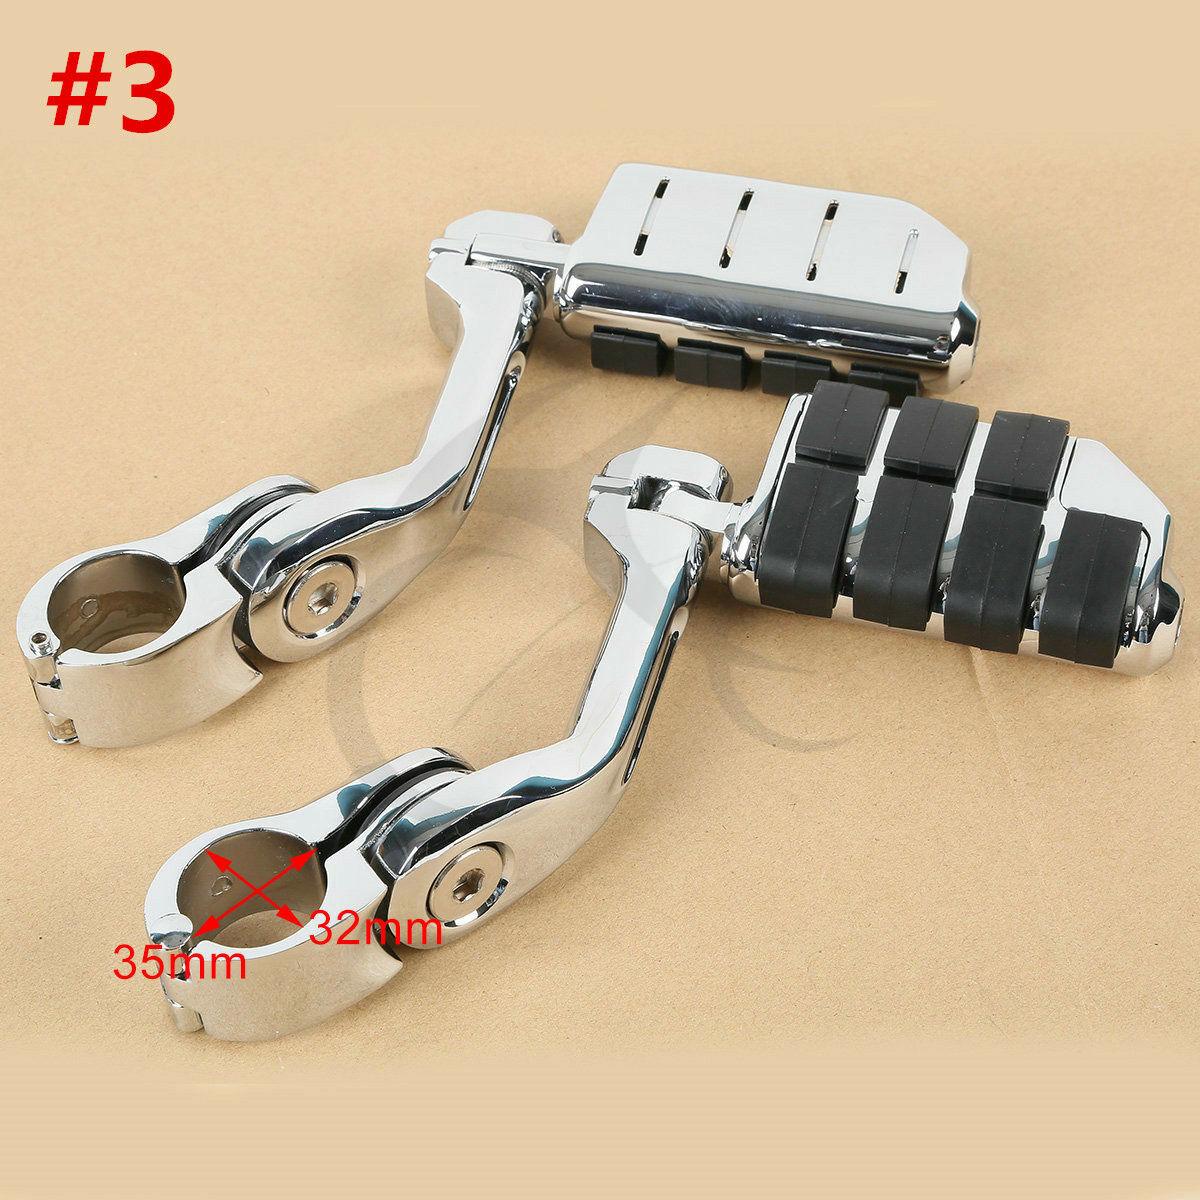 1 1/4" Engine Guard Mounts Clamps Highway Foot Pegs Footrest Fit For Harley US - Moto Life Products